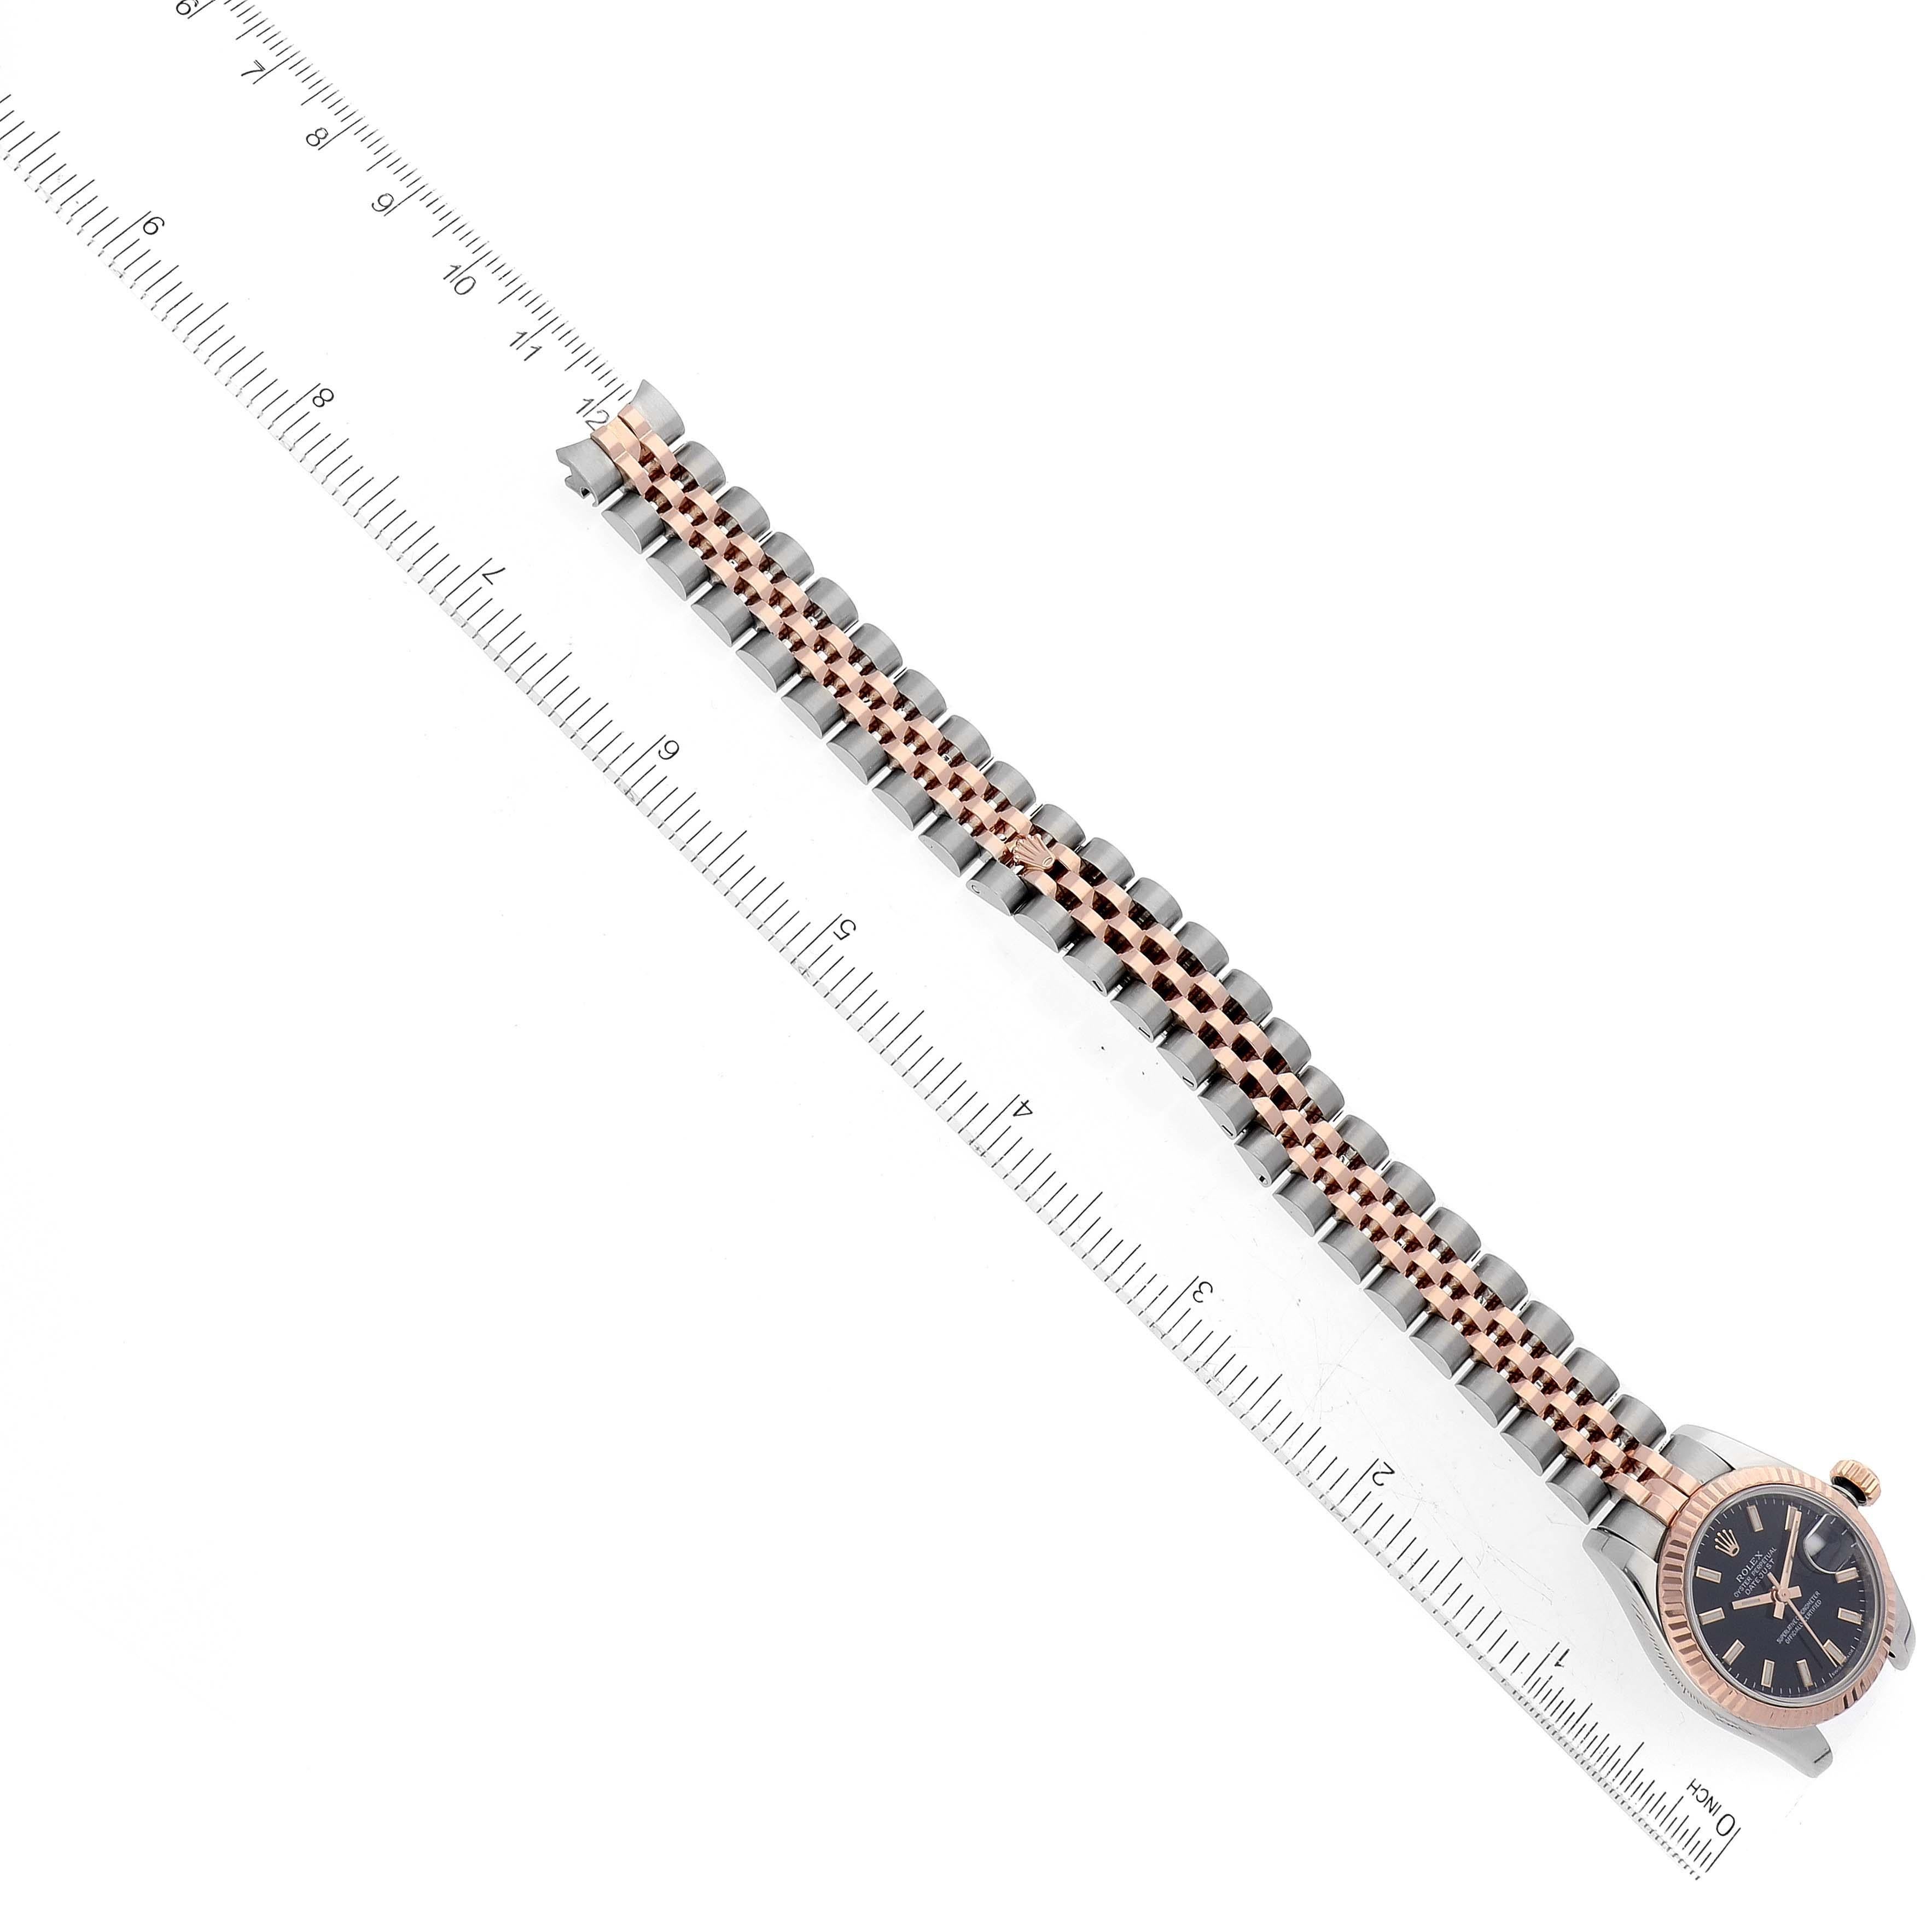 Rolex Datejust Steel Rose Gold Black Dial Ladies Watch 179171 Box Card For Sale 6